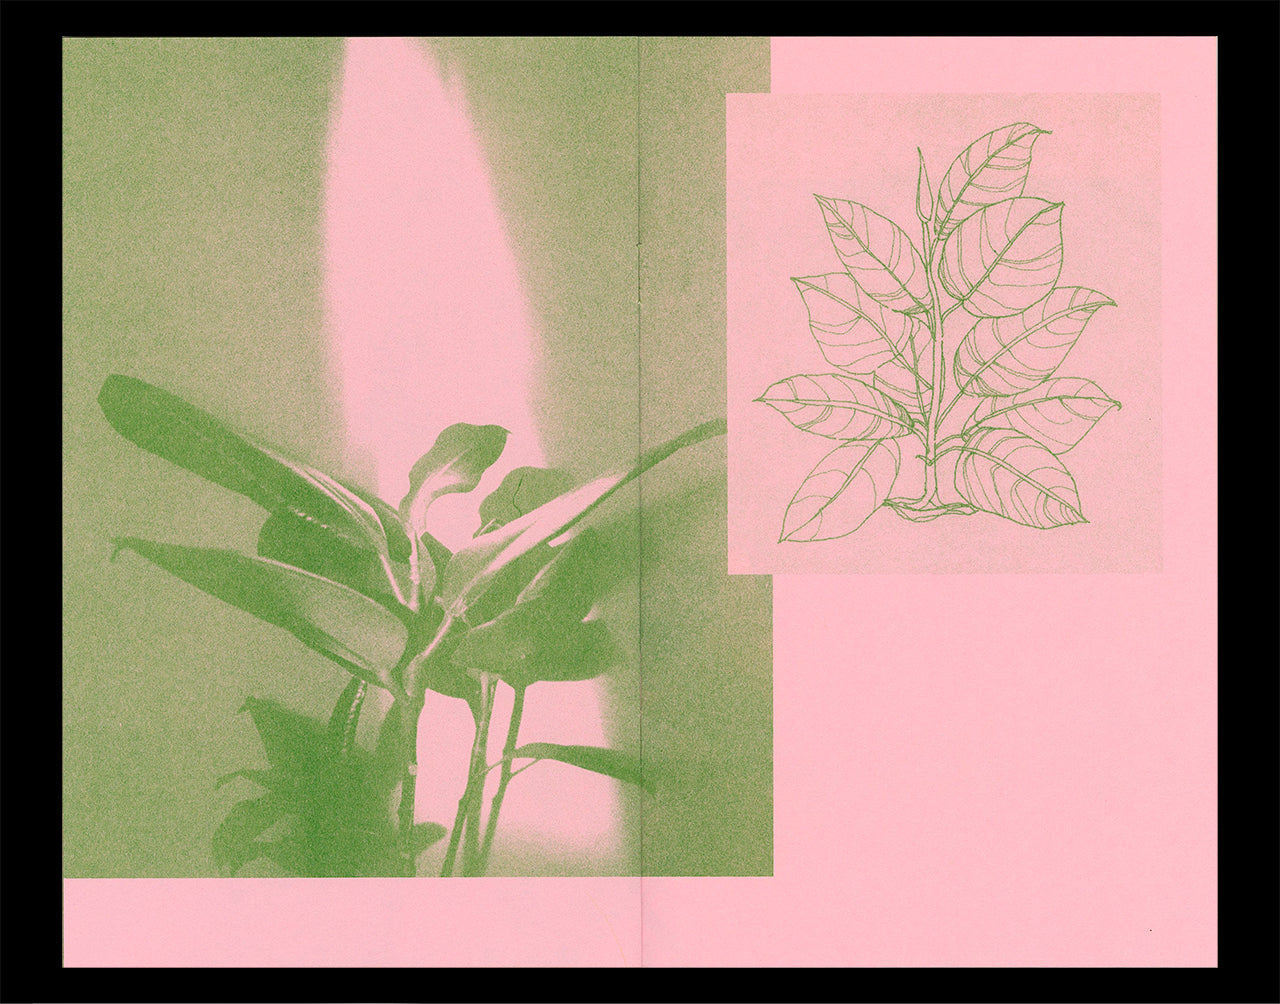 Interior spread of Nicole M. Doan's Portraits of Home showing a photograph an an illustration of plants printed in kelly green Riso ink on a pink paper background.